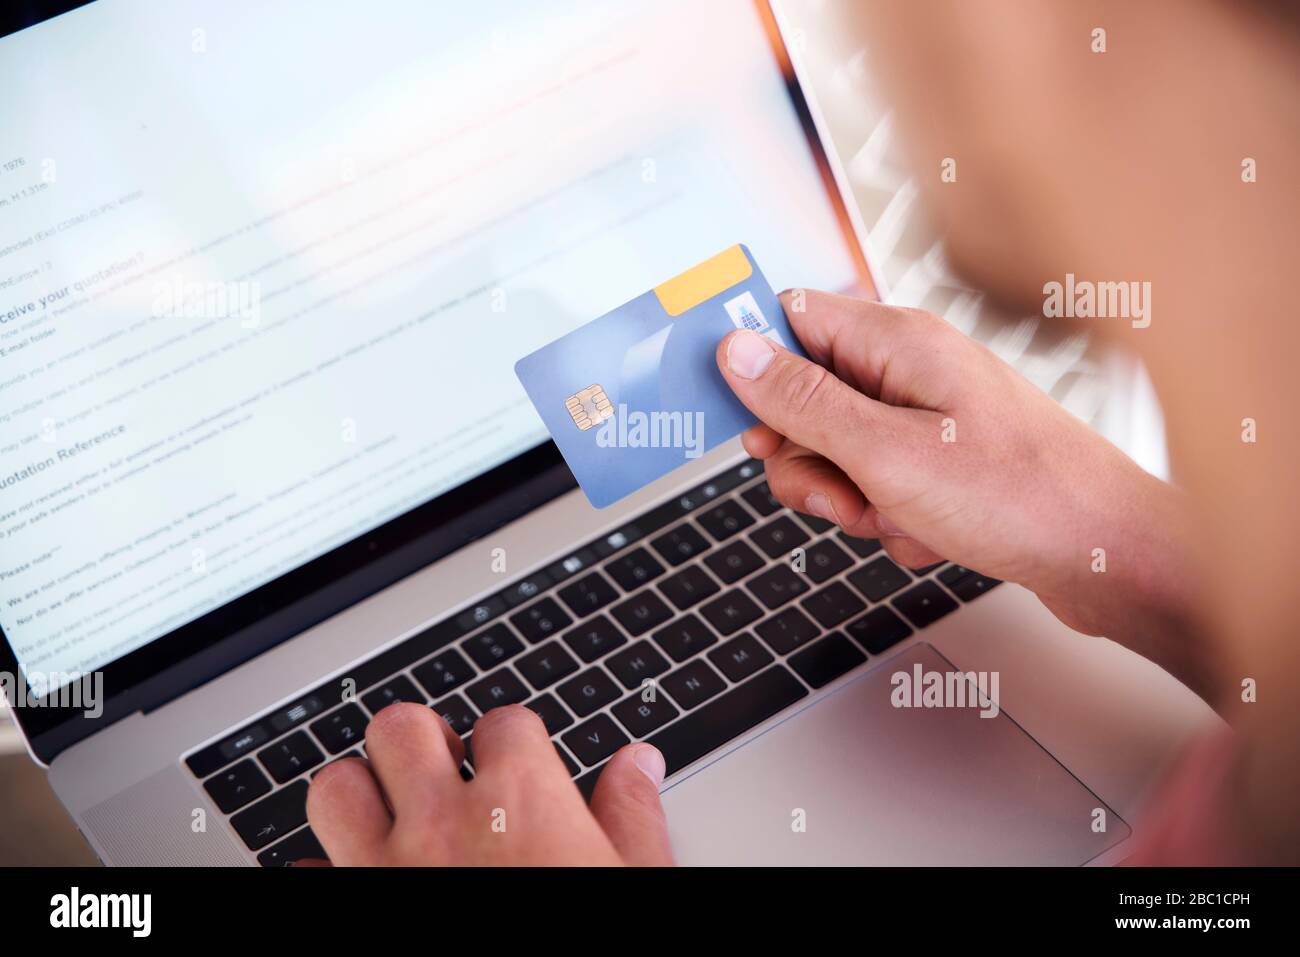 Man using laptop and holding credit card, close-up Banque D'Images